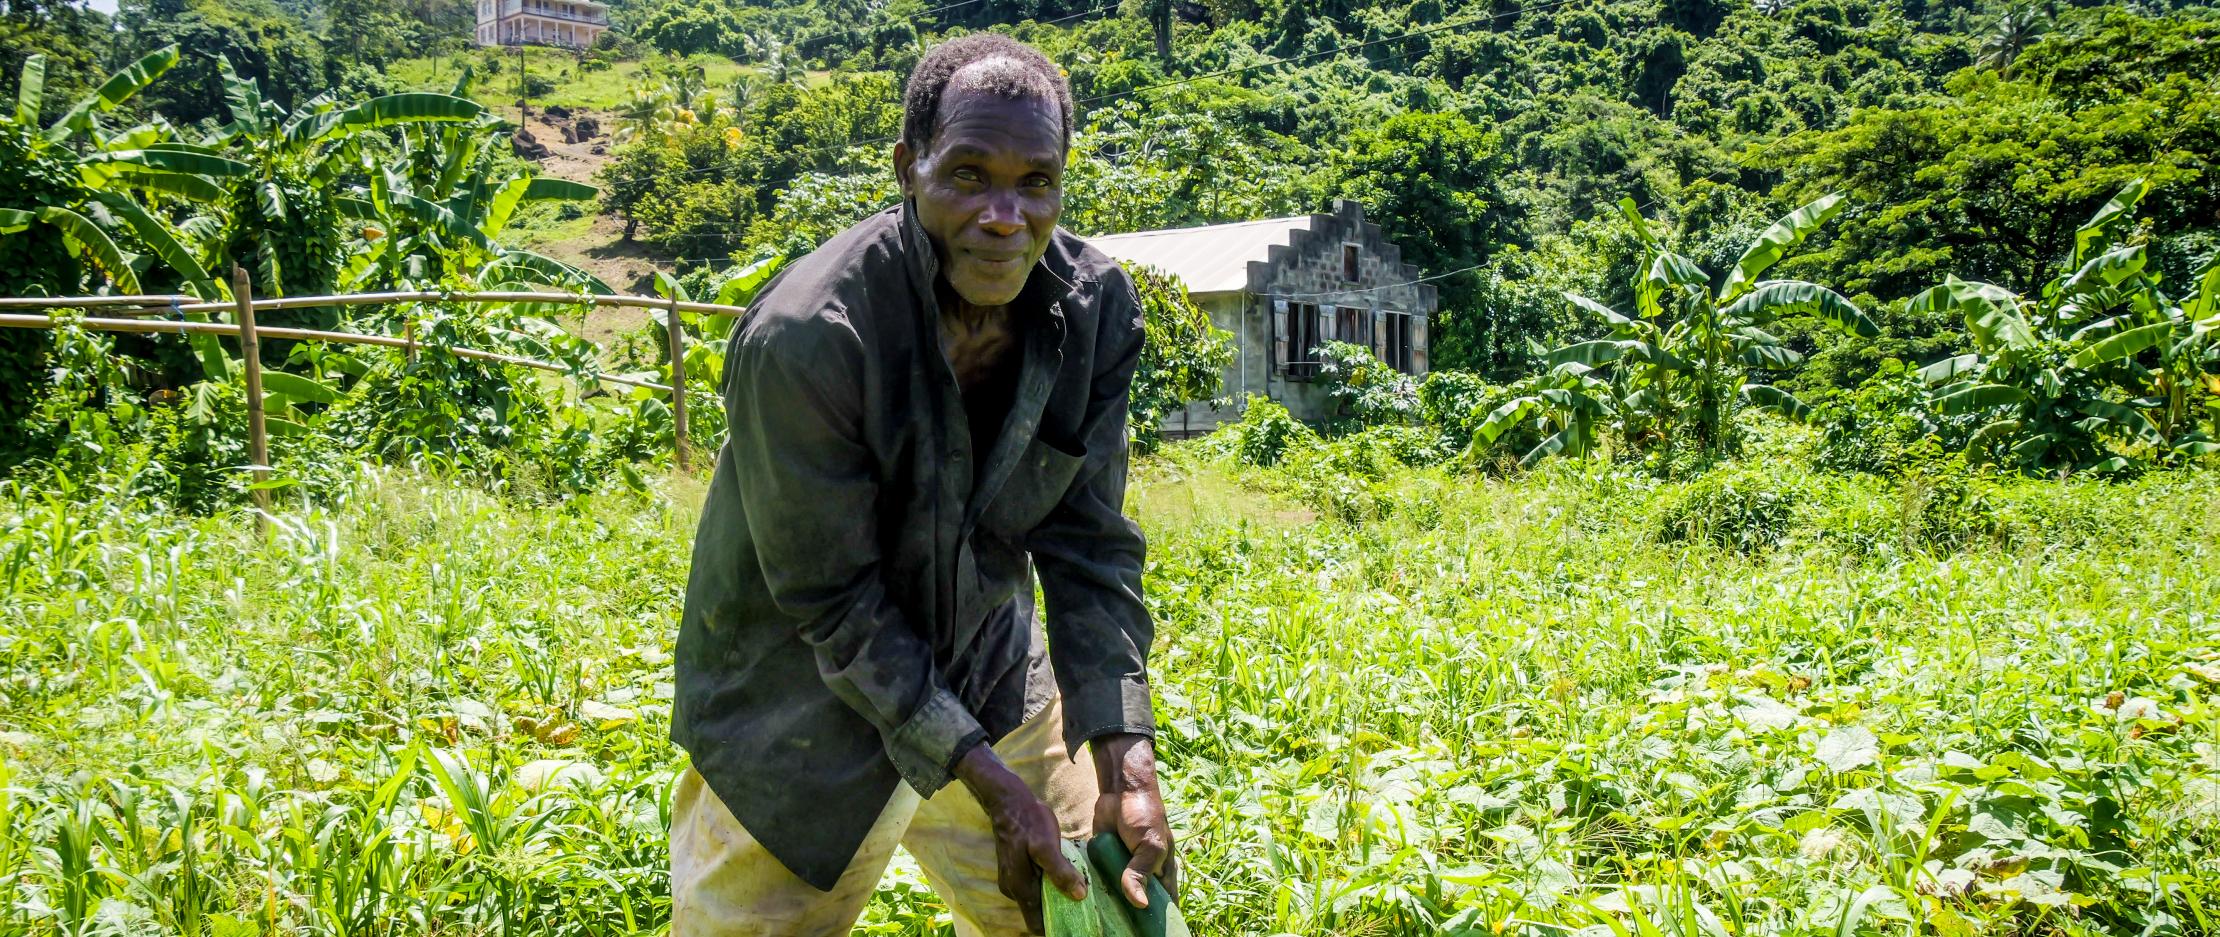 Farmer in Saint Vincent and the Grenadines